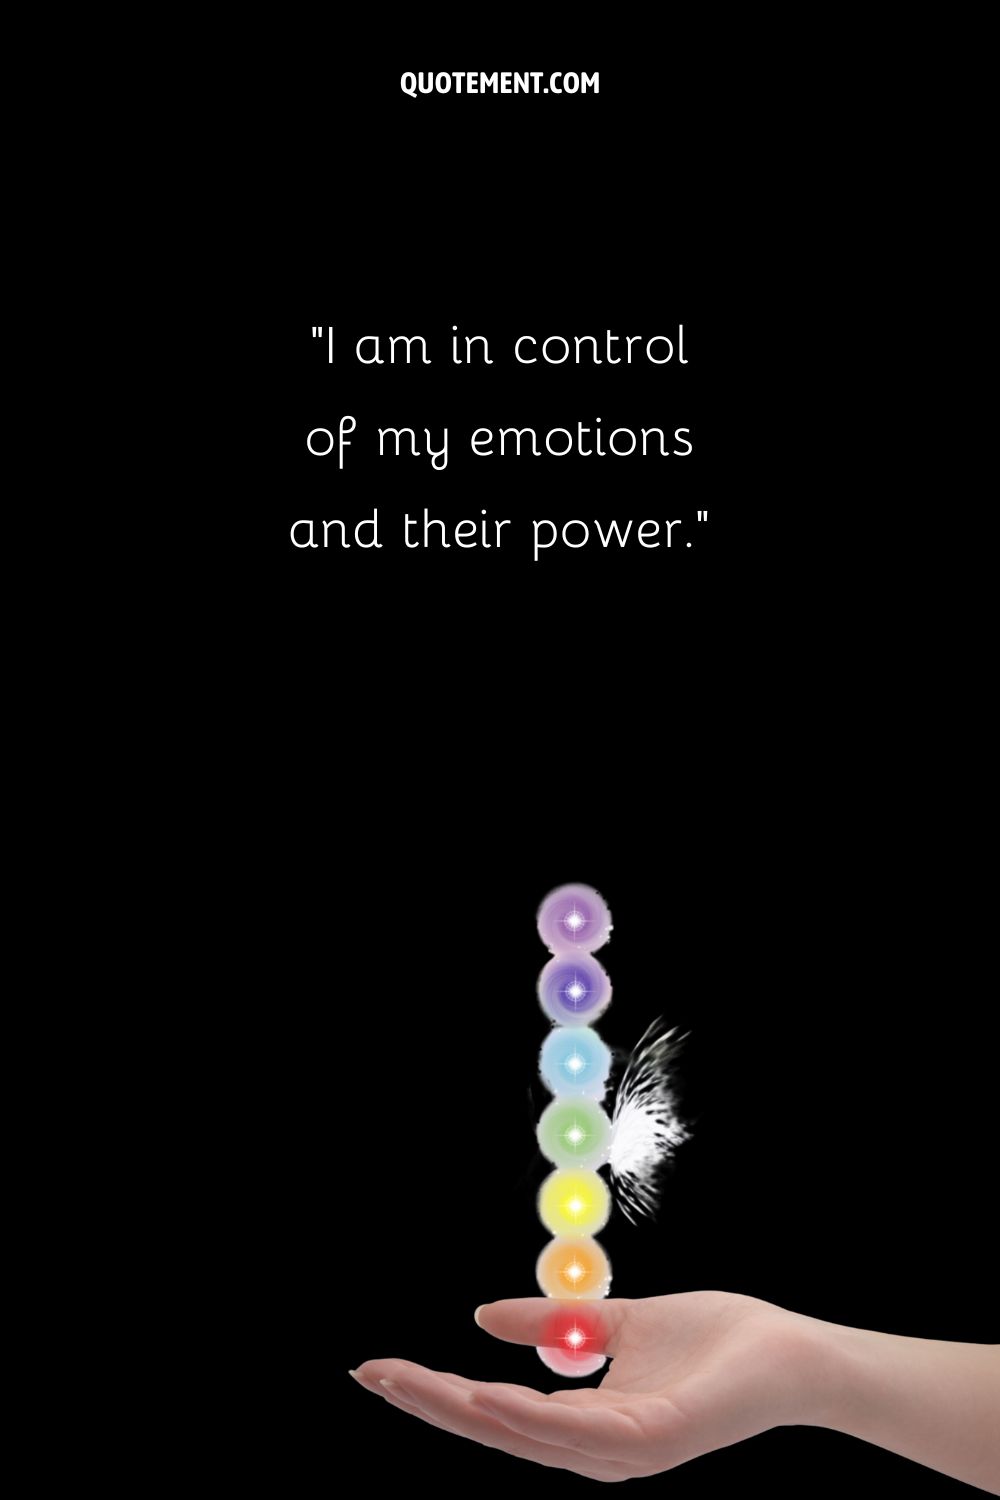 Affirmation for people dealing with anxiety and insecurity represented by the hand holding chakra energy
